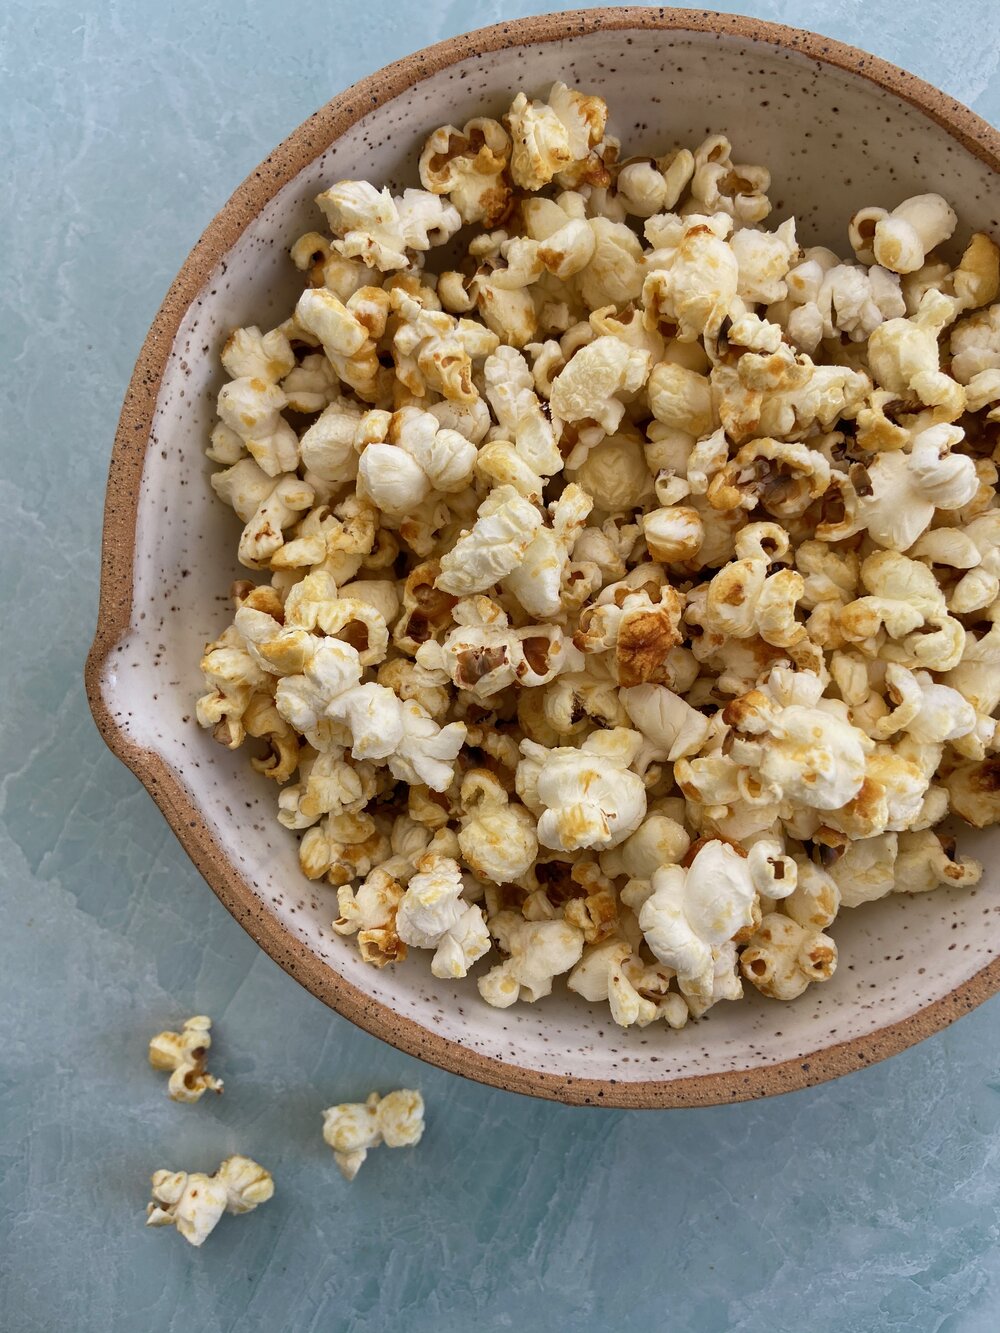 Meghans Kettle Corn Recipe | Didn't I Just Feed You